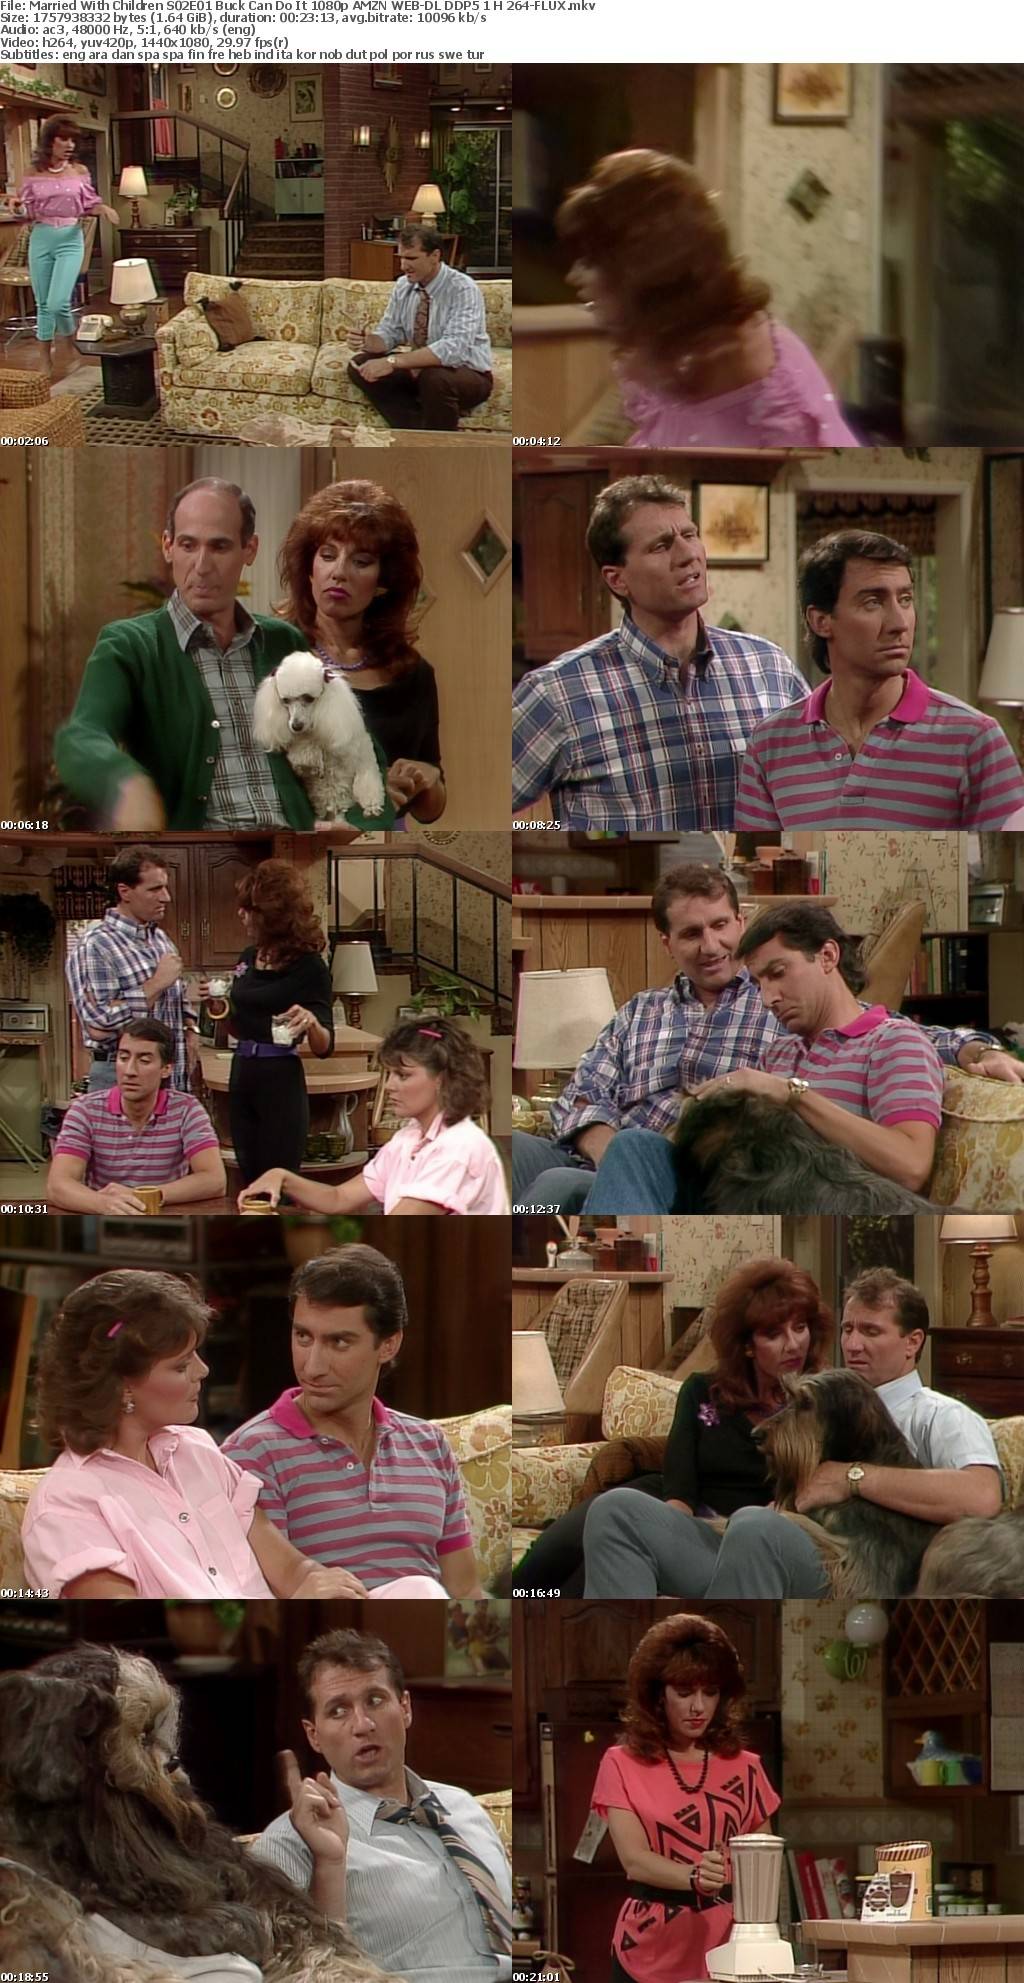 Married With Children S02E01 Buck Can Do It 1080p AMZN WEB-DL DDP5 1 H 264-FLUX